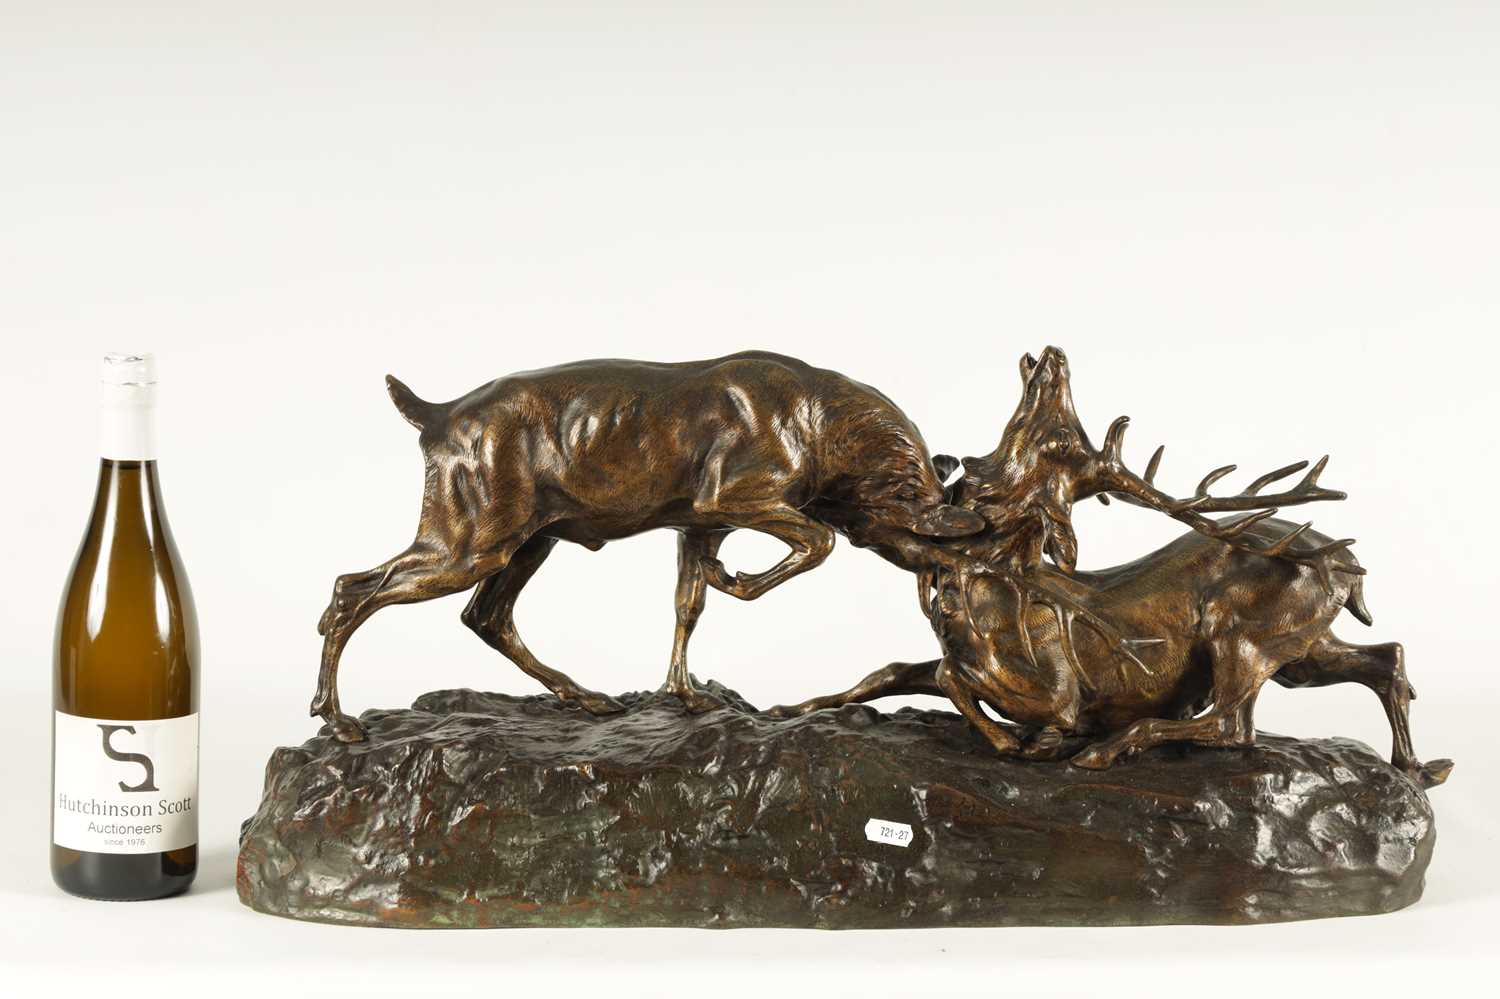 THOMAS FRANCO CARTIER (1879-1943) A LARGE 19TH CENTURY FRENCH BRONZE SCULPTURE - Image 8 of 10